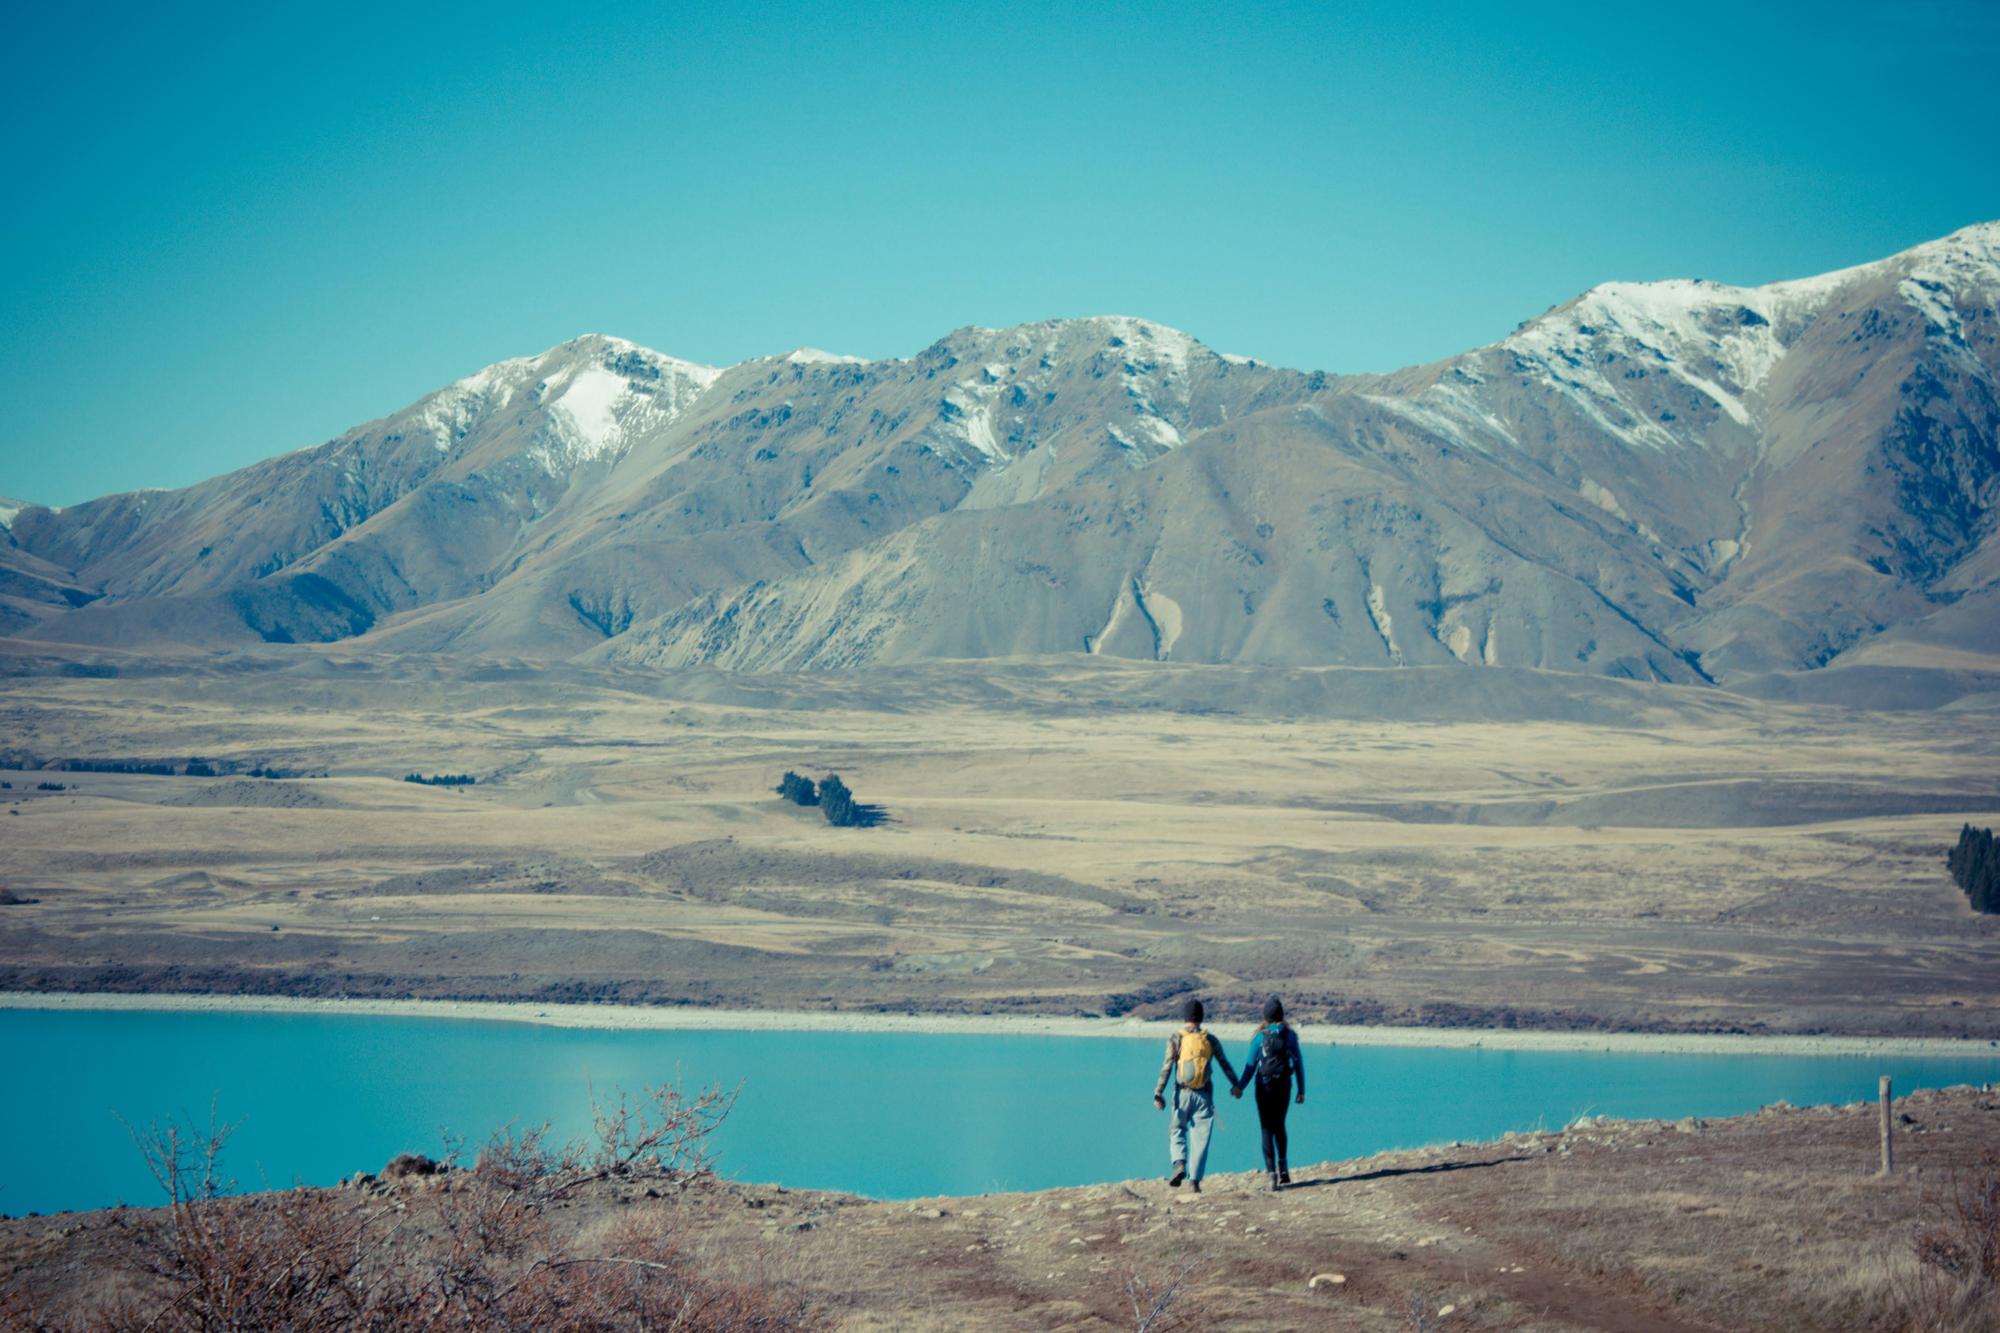 A couple hold hands over looking lake tekapo